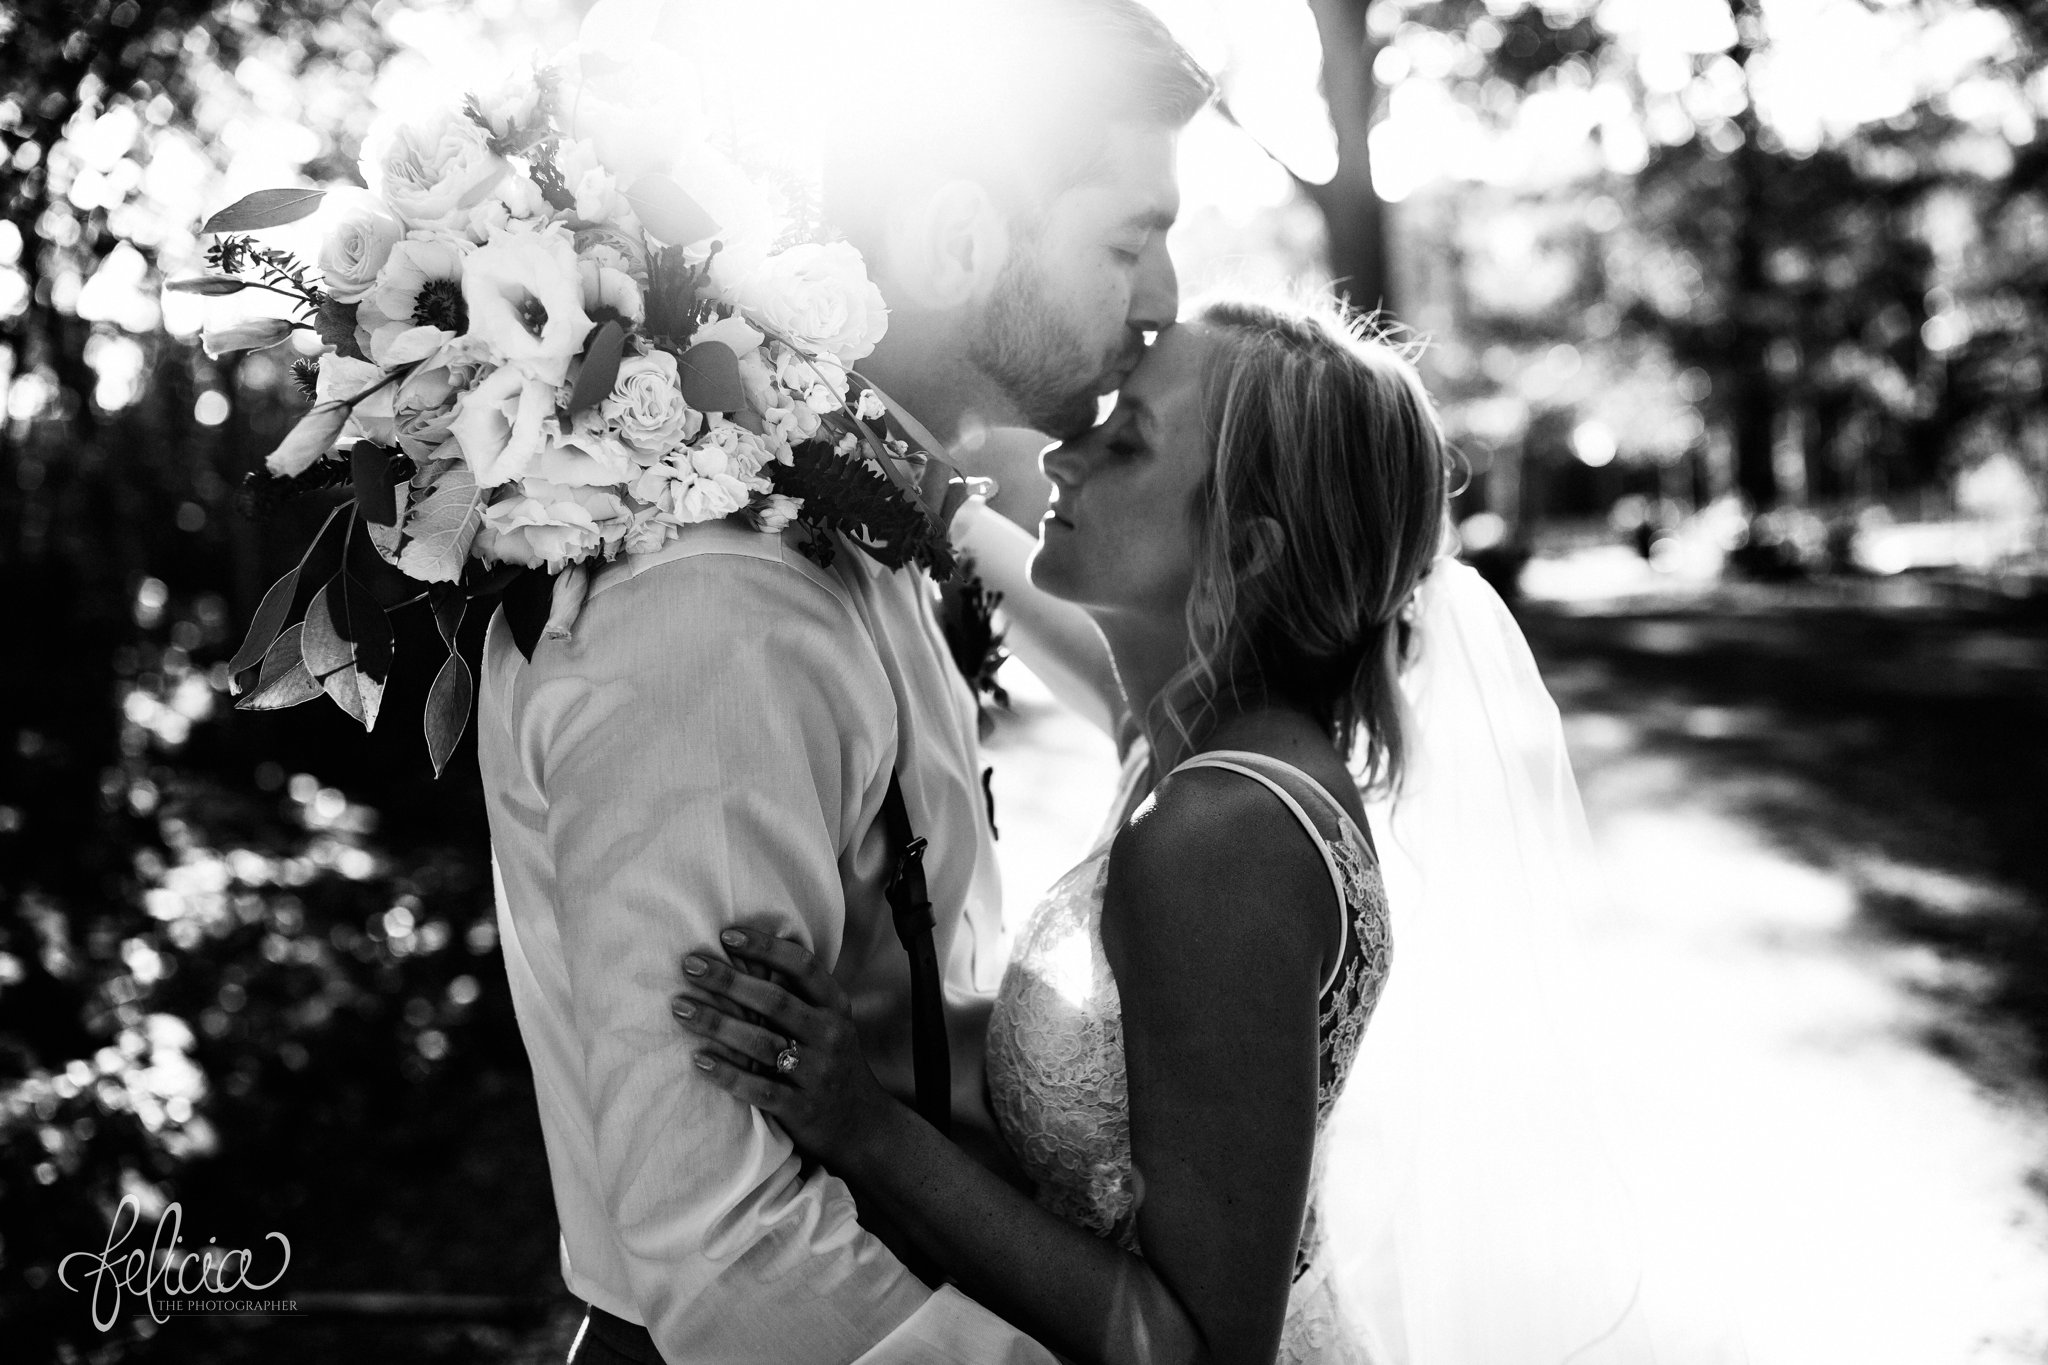 images by feliciathephotographer.com | destination wedding | the makey house | dave gibson coordinator | travel photographer | Savannah, georgia | southern | gravel road | portraits | bride | groom | golden hour | sunset | trees | green | romantic | brown suspenders | lace dress | train | cuddly | kiss | black and white 